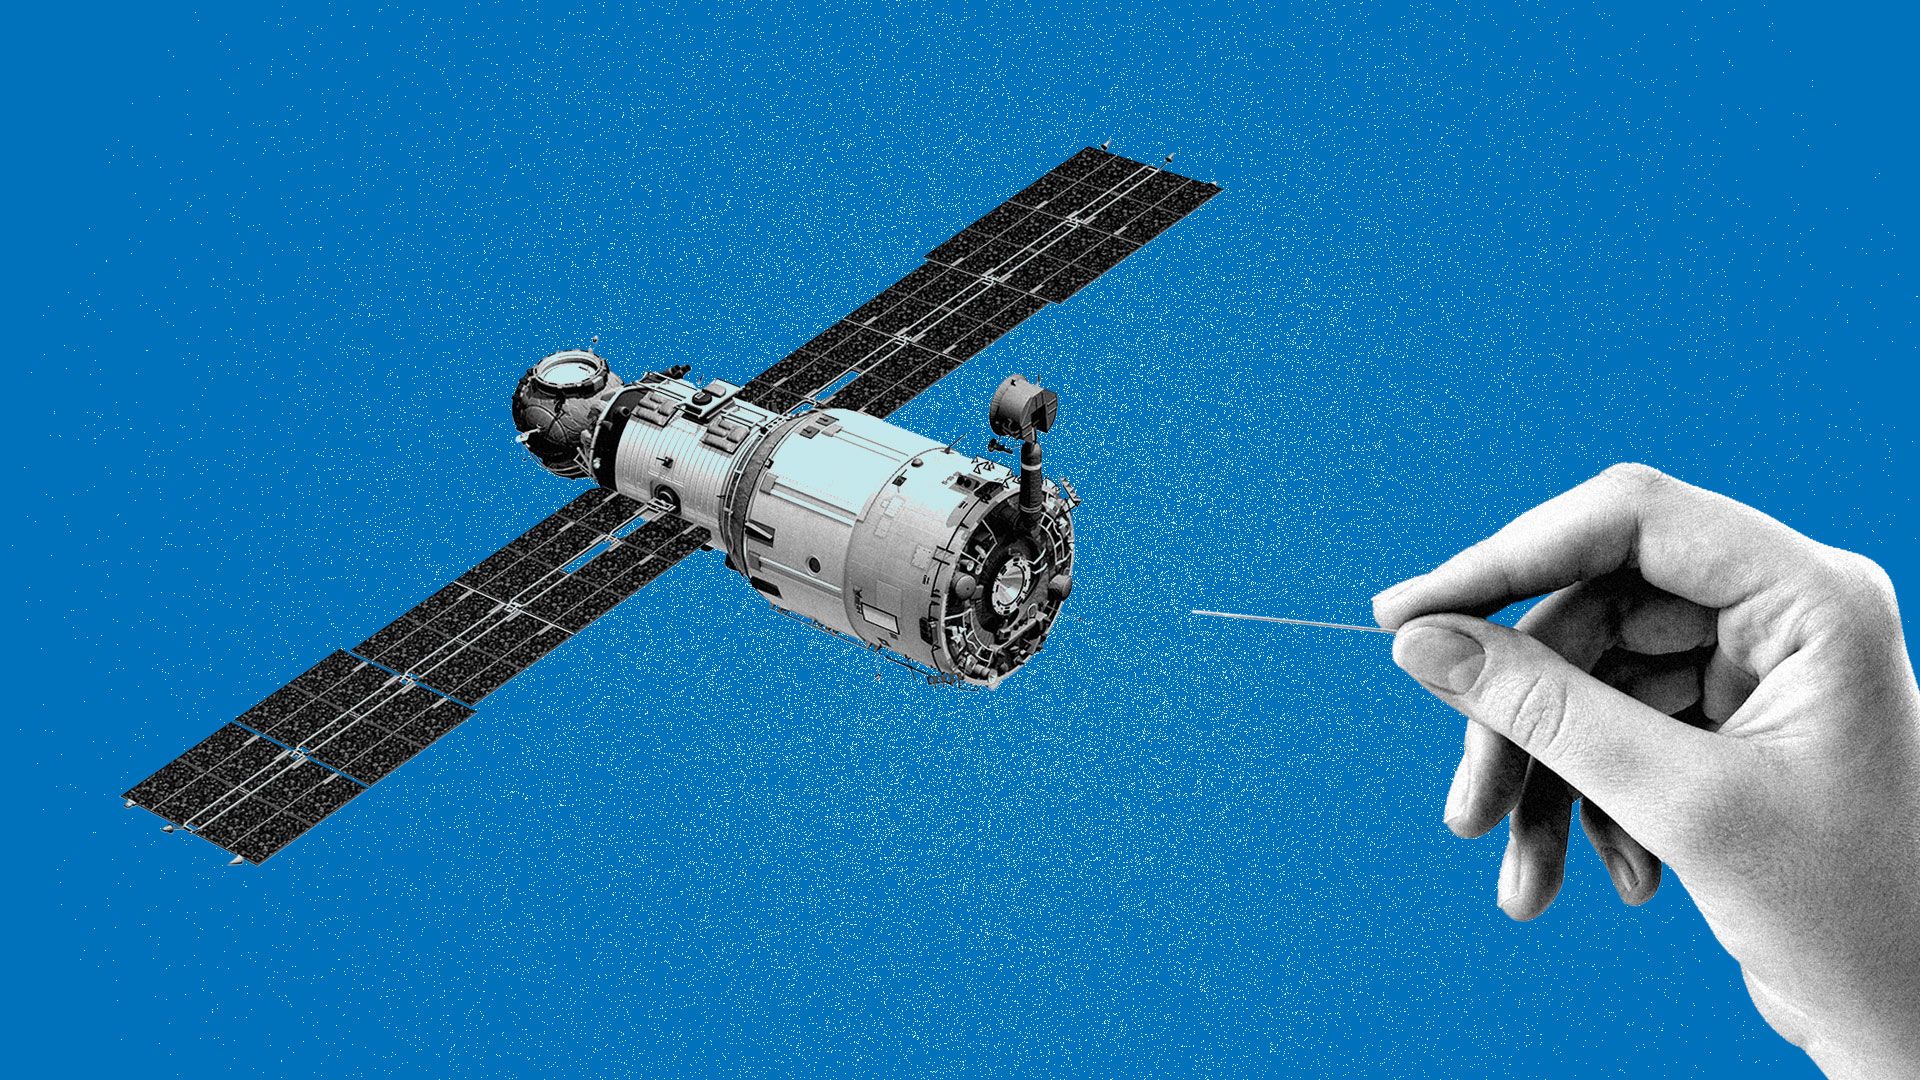 Illustration of an orbiting satellite about to be punctured by a pin.